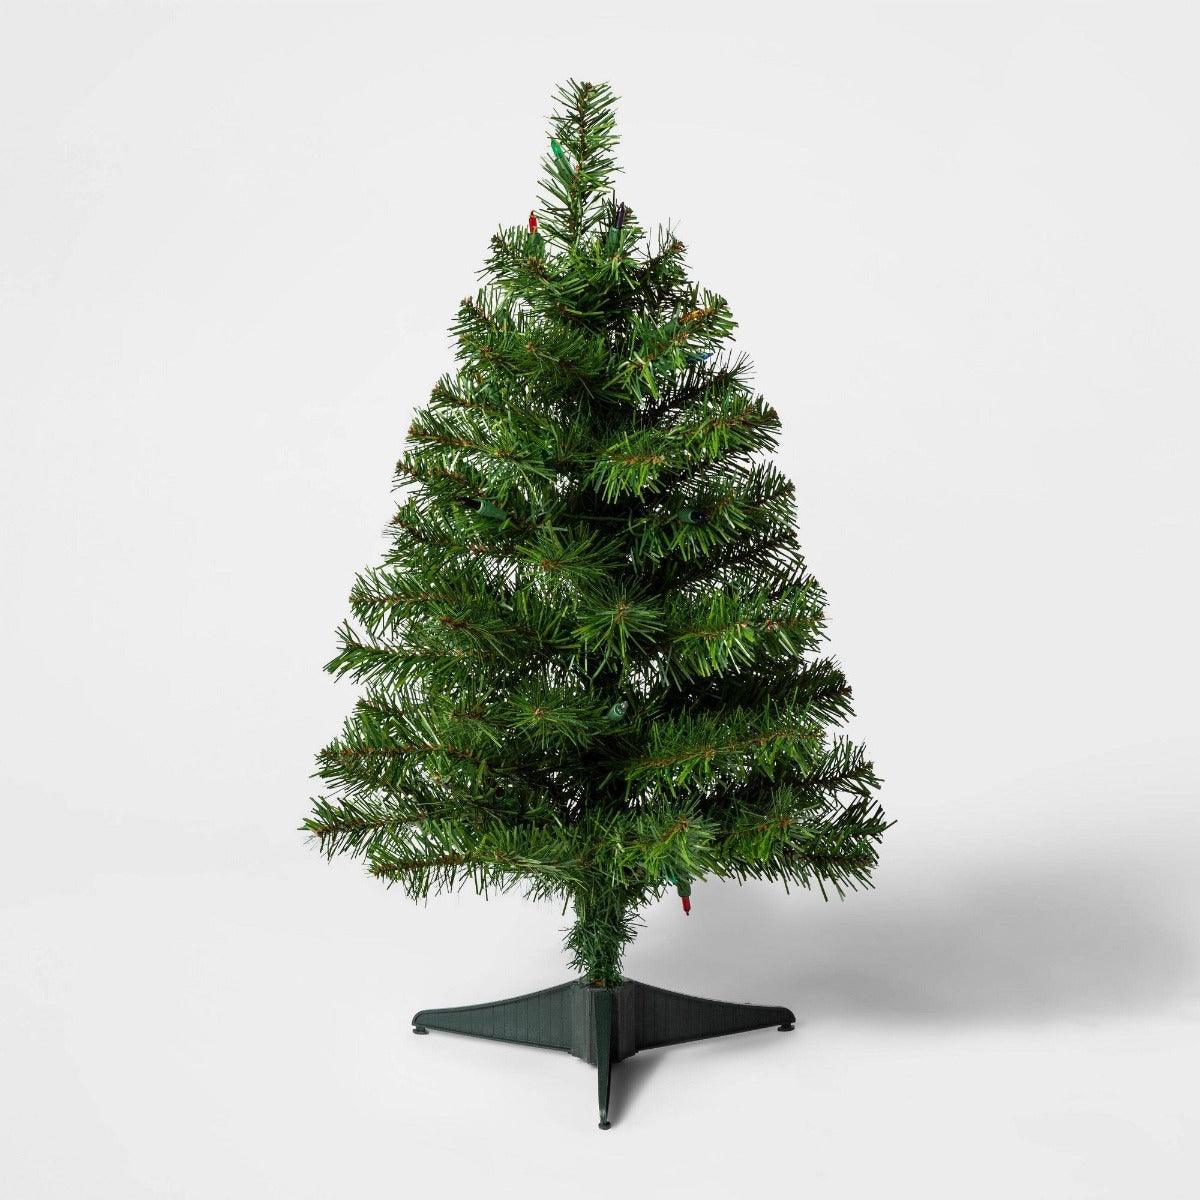 PartyCorp Christmas Tree Artificial 2 feet, for Christmas Decoration, 1 piece